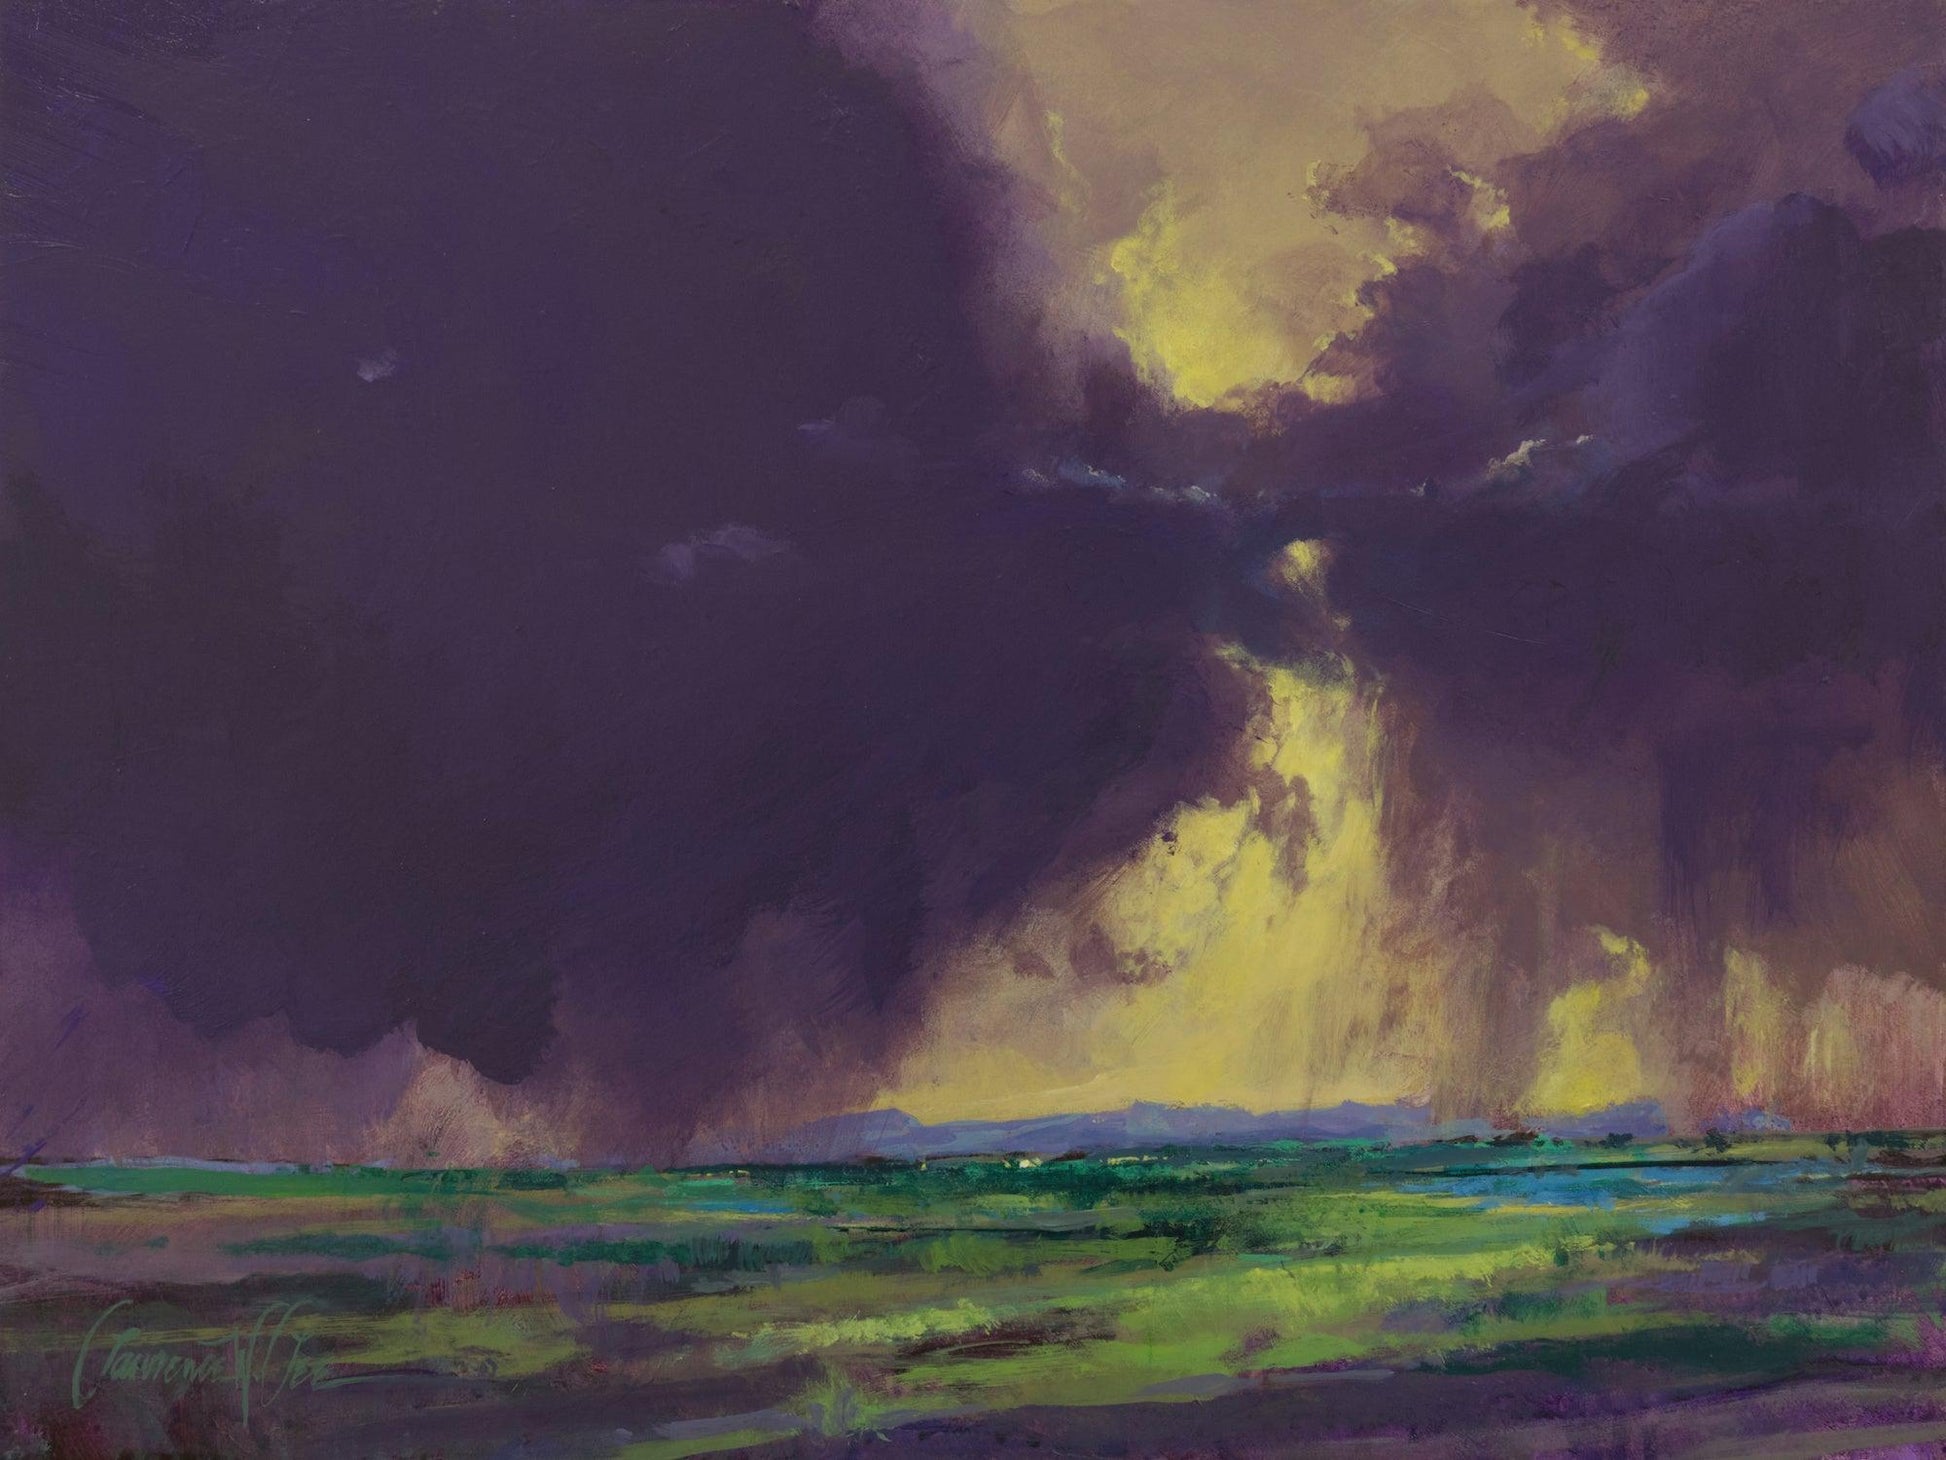 Downpour-Painting-Lawrence Lee-Sorrel Sky Gallery